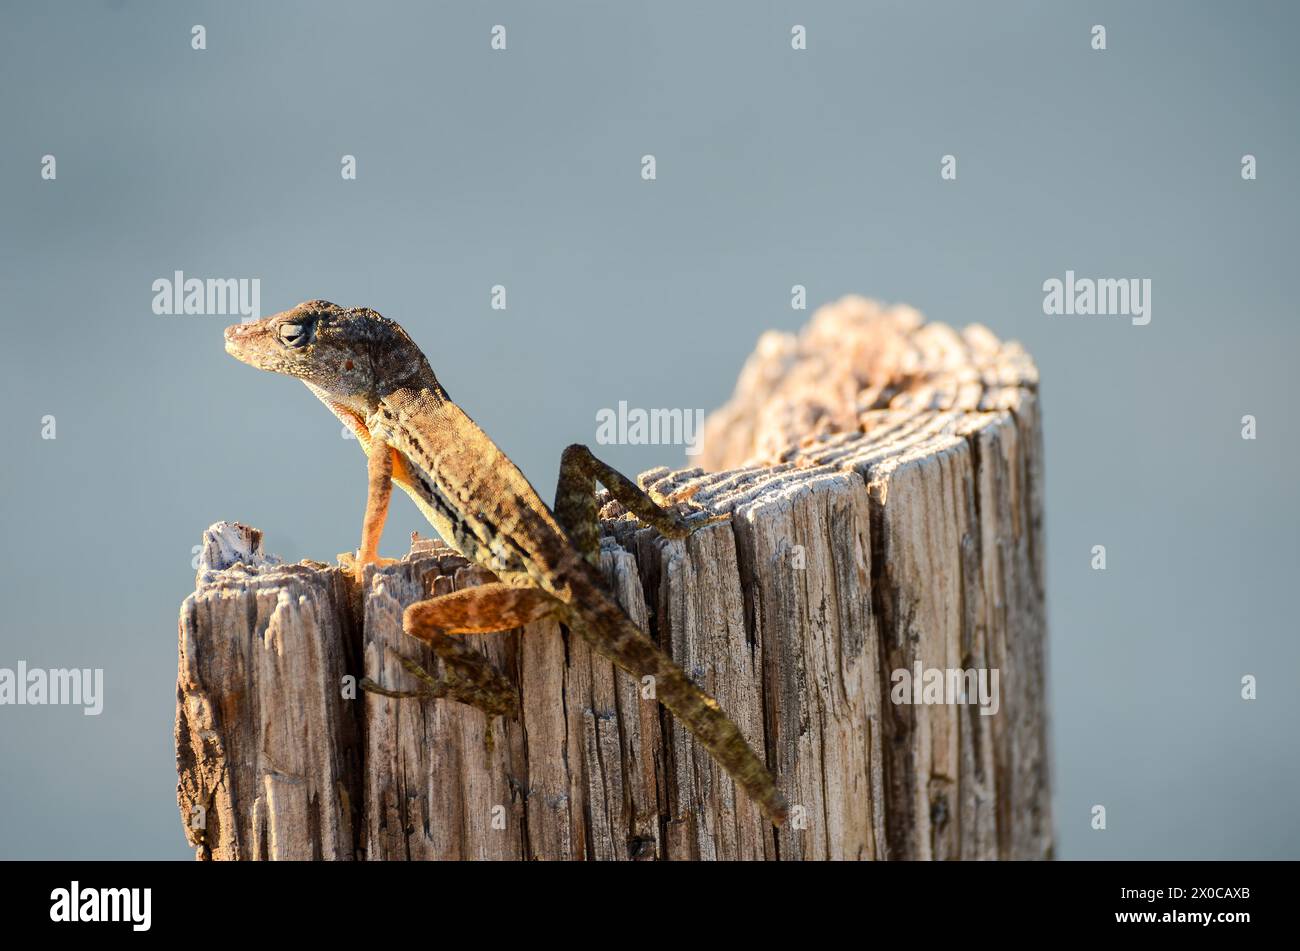 A lizard is sitting on a log. The lizard is brown and has a long tail Stock Photo